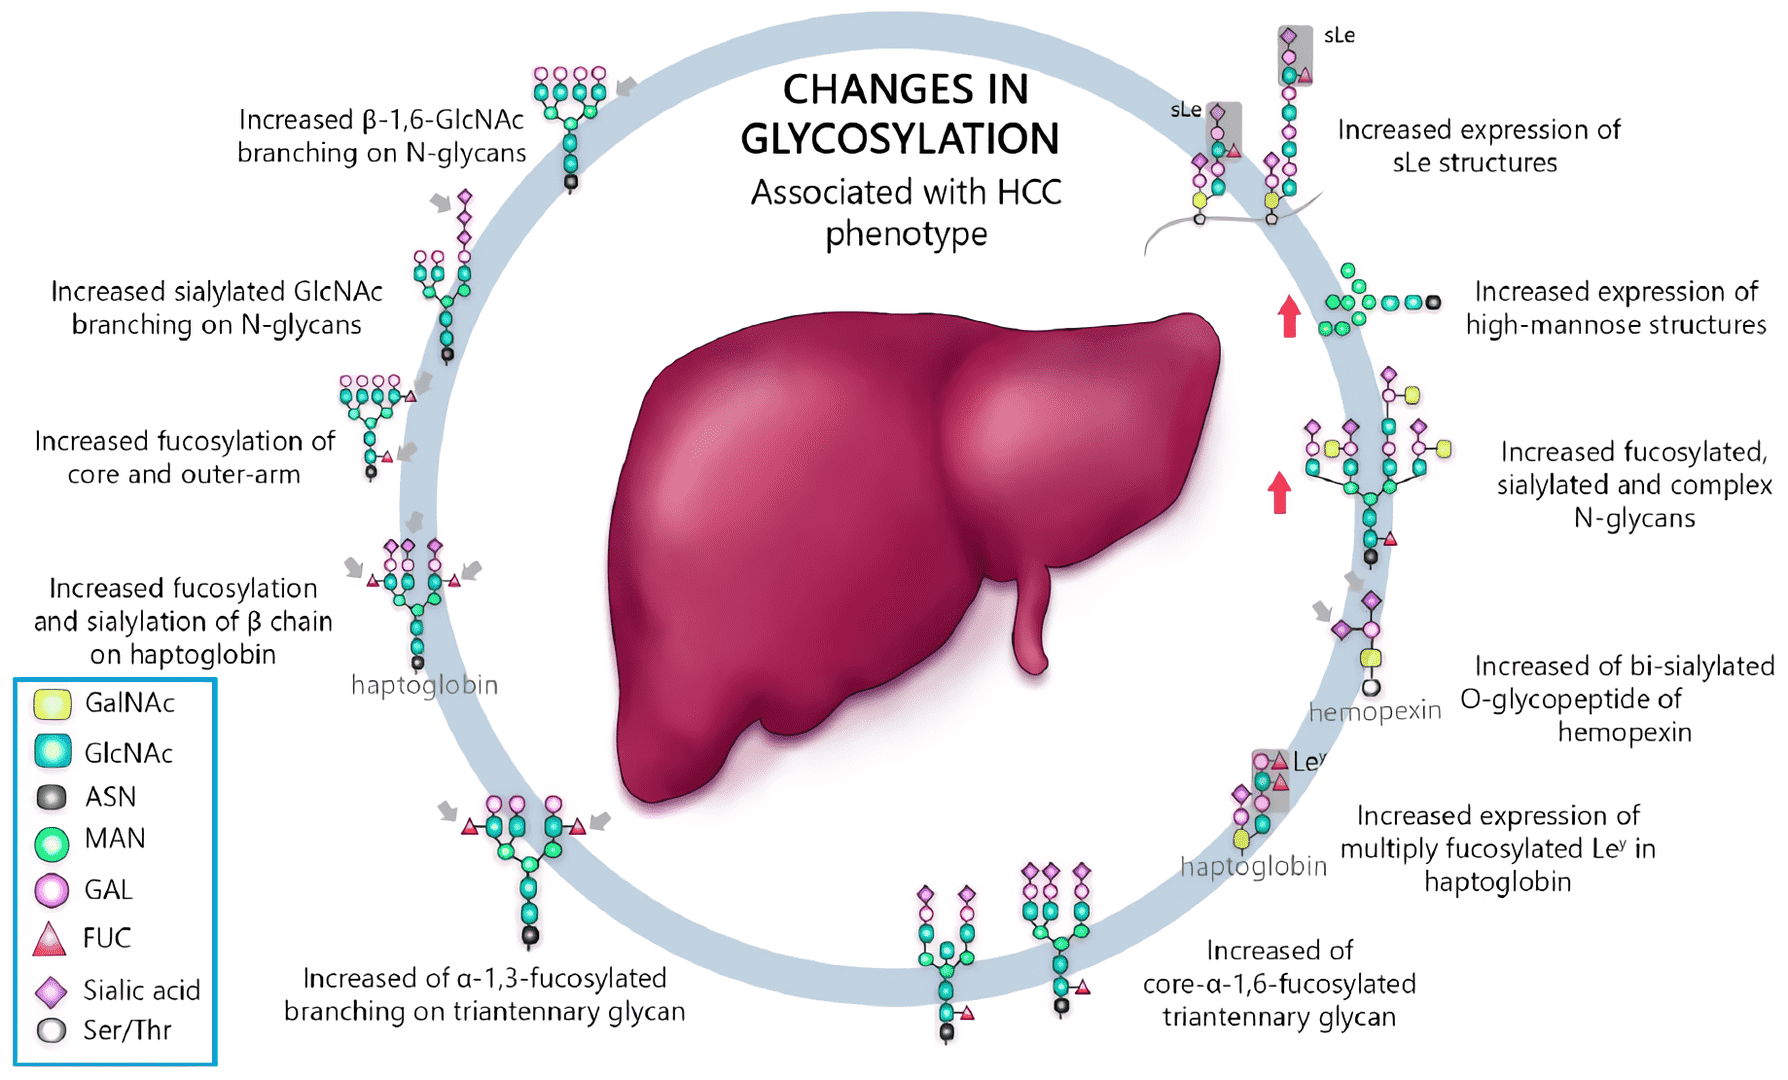 Schematic representation of the most important glycan alterations associated with hepatocellular carcinoma (HCC) phenotype.